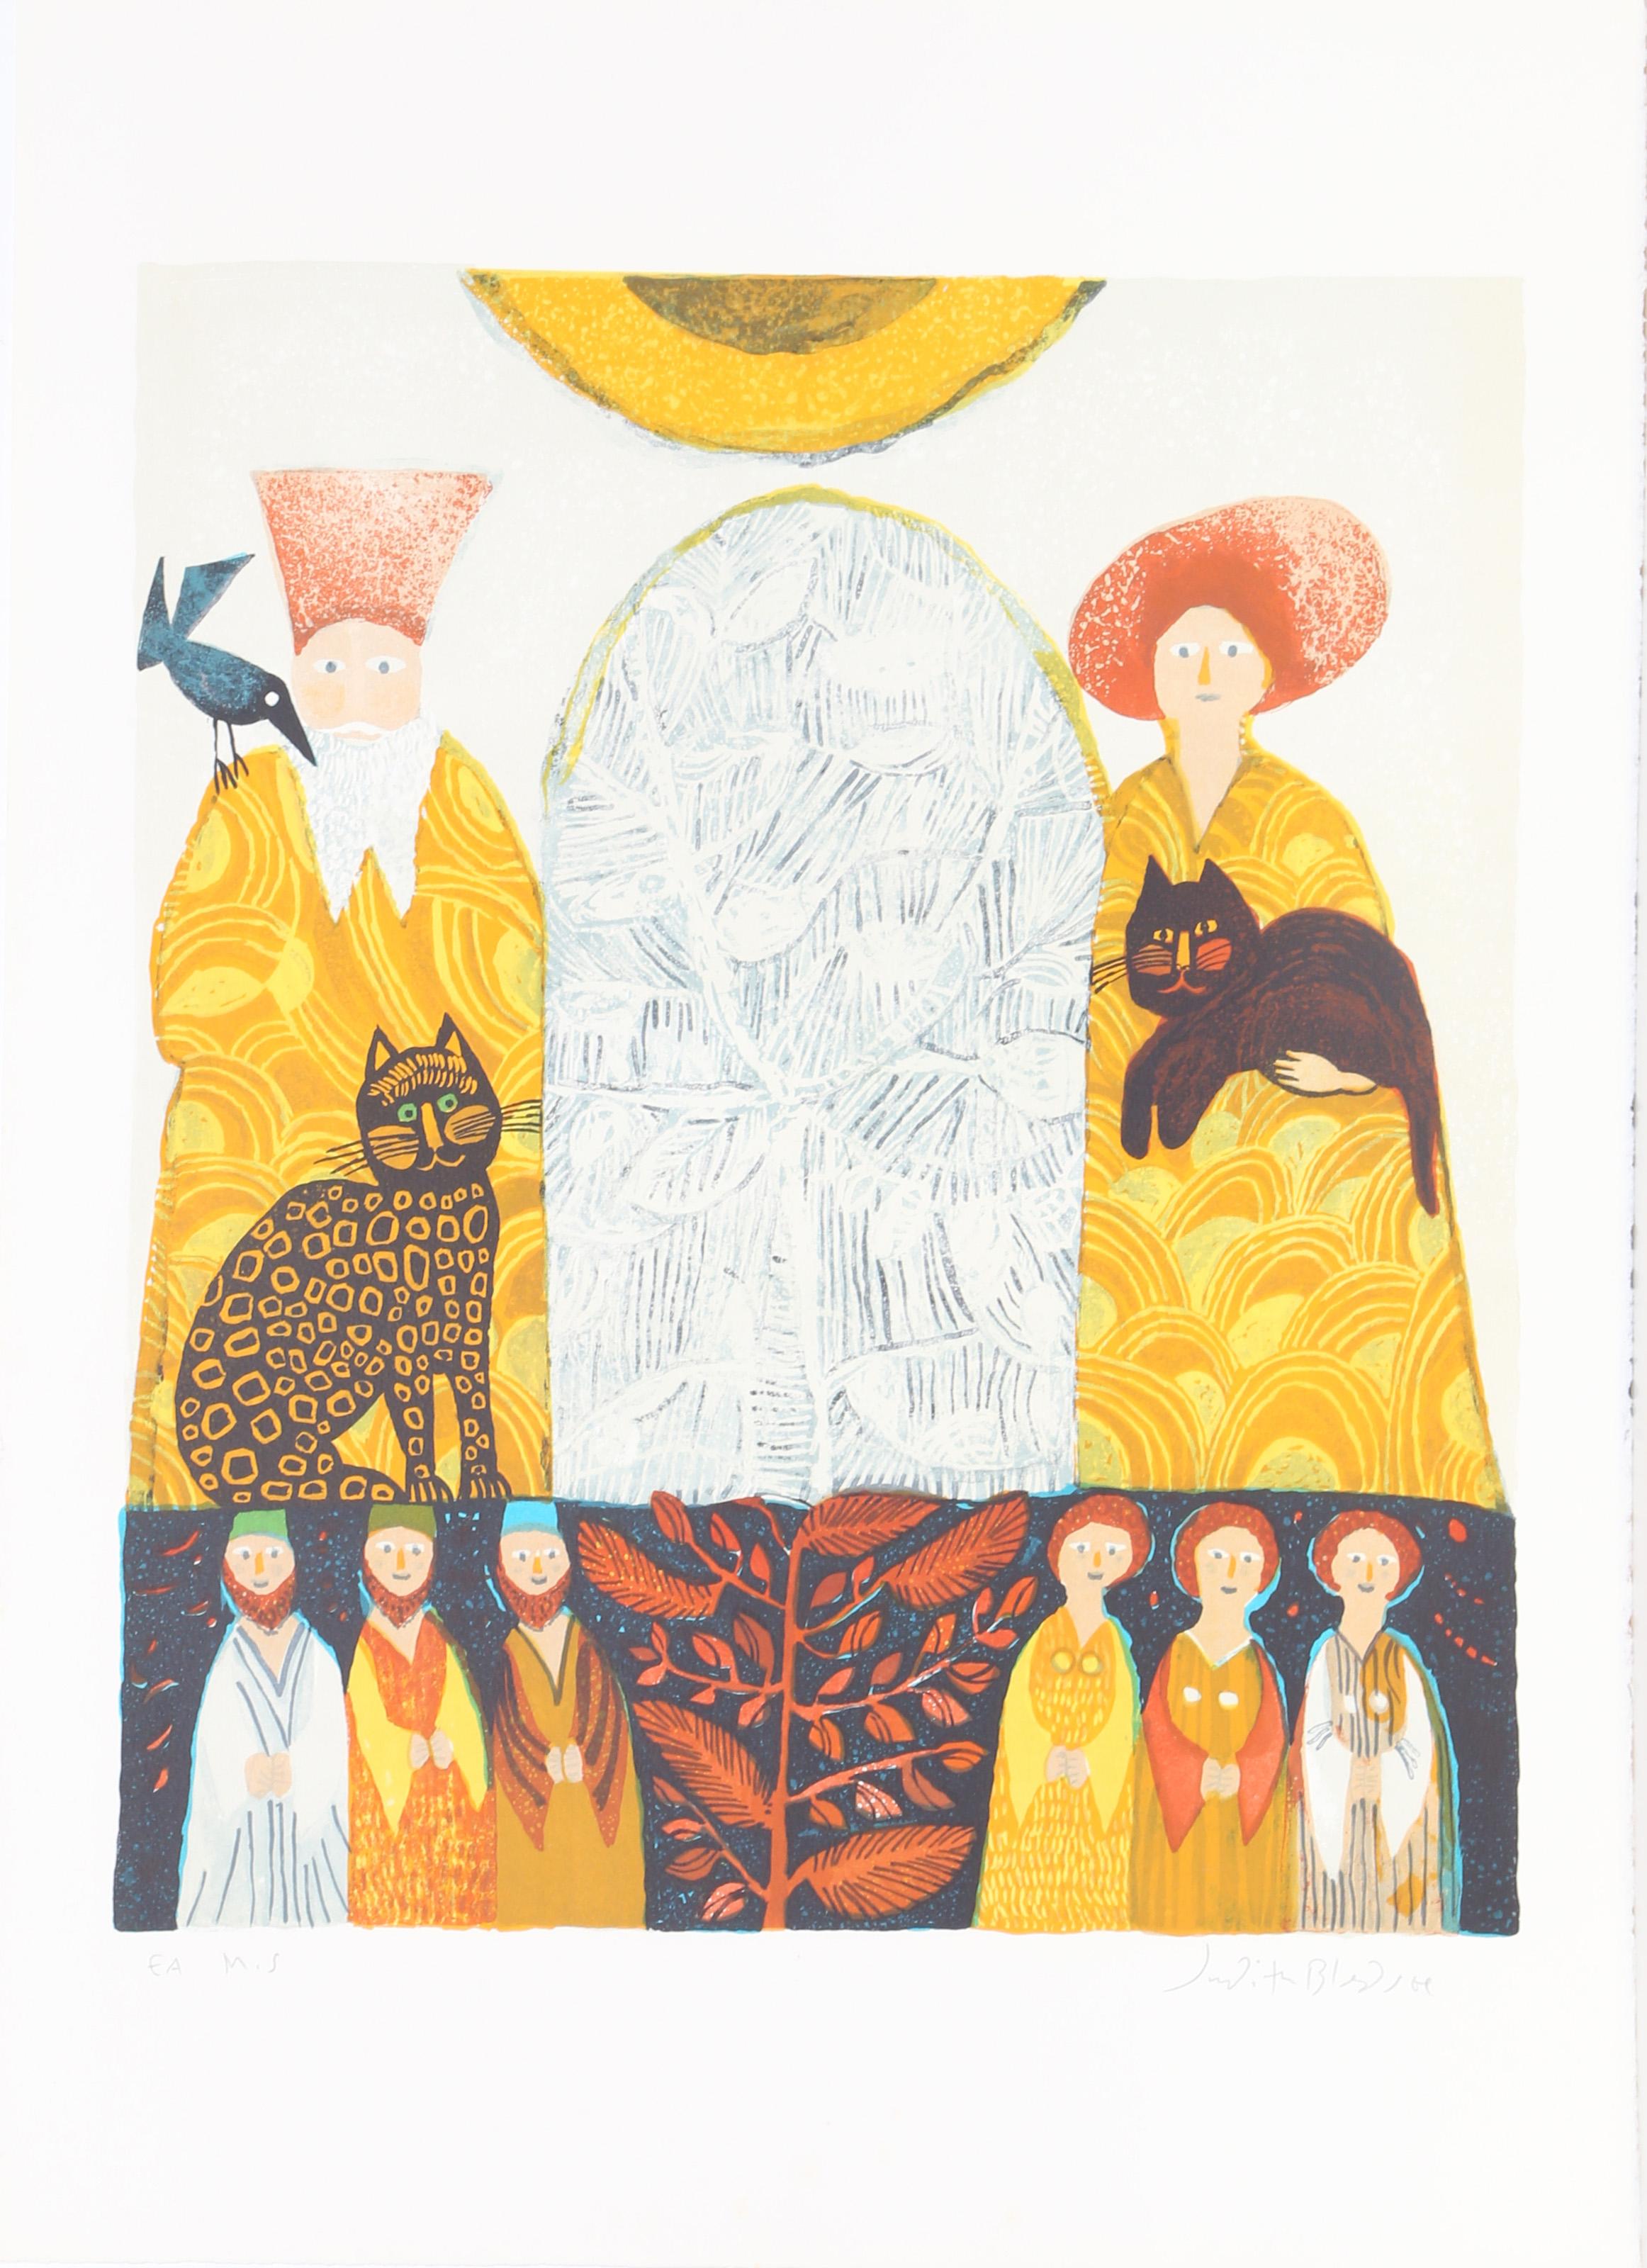 Judith Bledsoe, American (1938 - 2013) -  Angels and Saints. Year: circa 1970, Medium: Lithograph, signed and dedicated in pencil, Edition: EA, Image Size: 21.5 x 18 inches, Size: 29 x 21 in. (73.66 x 53.34 cm), Description: Standing beside one